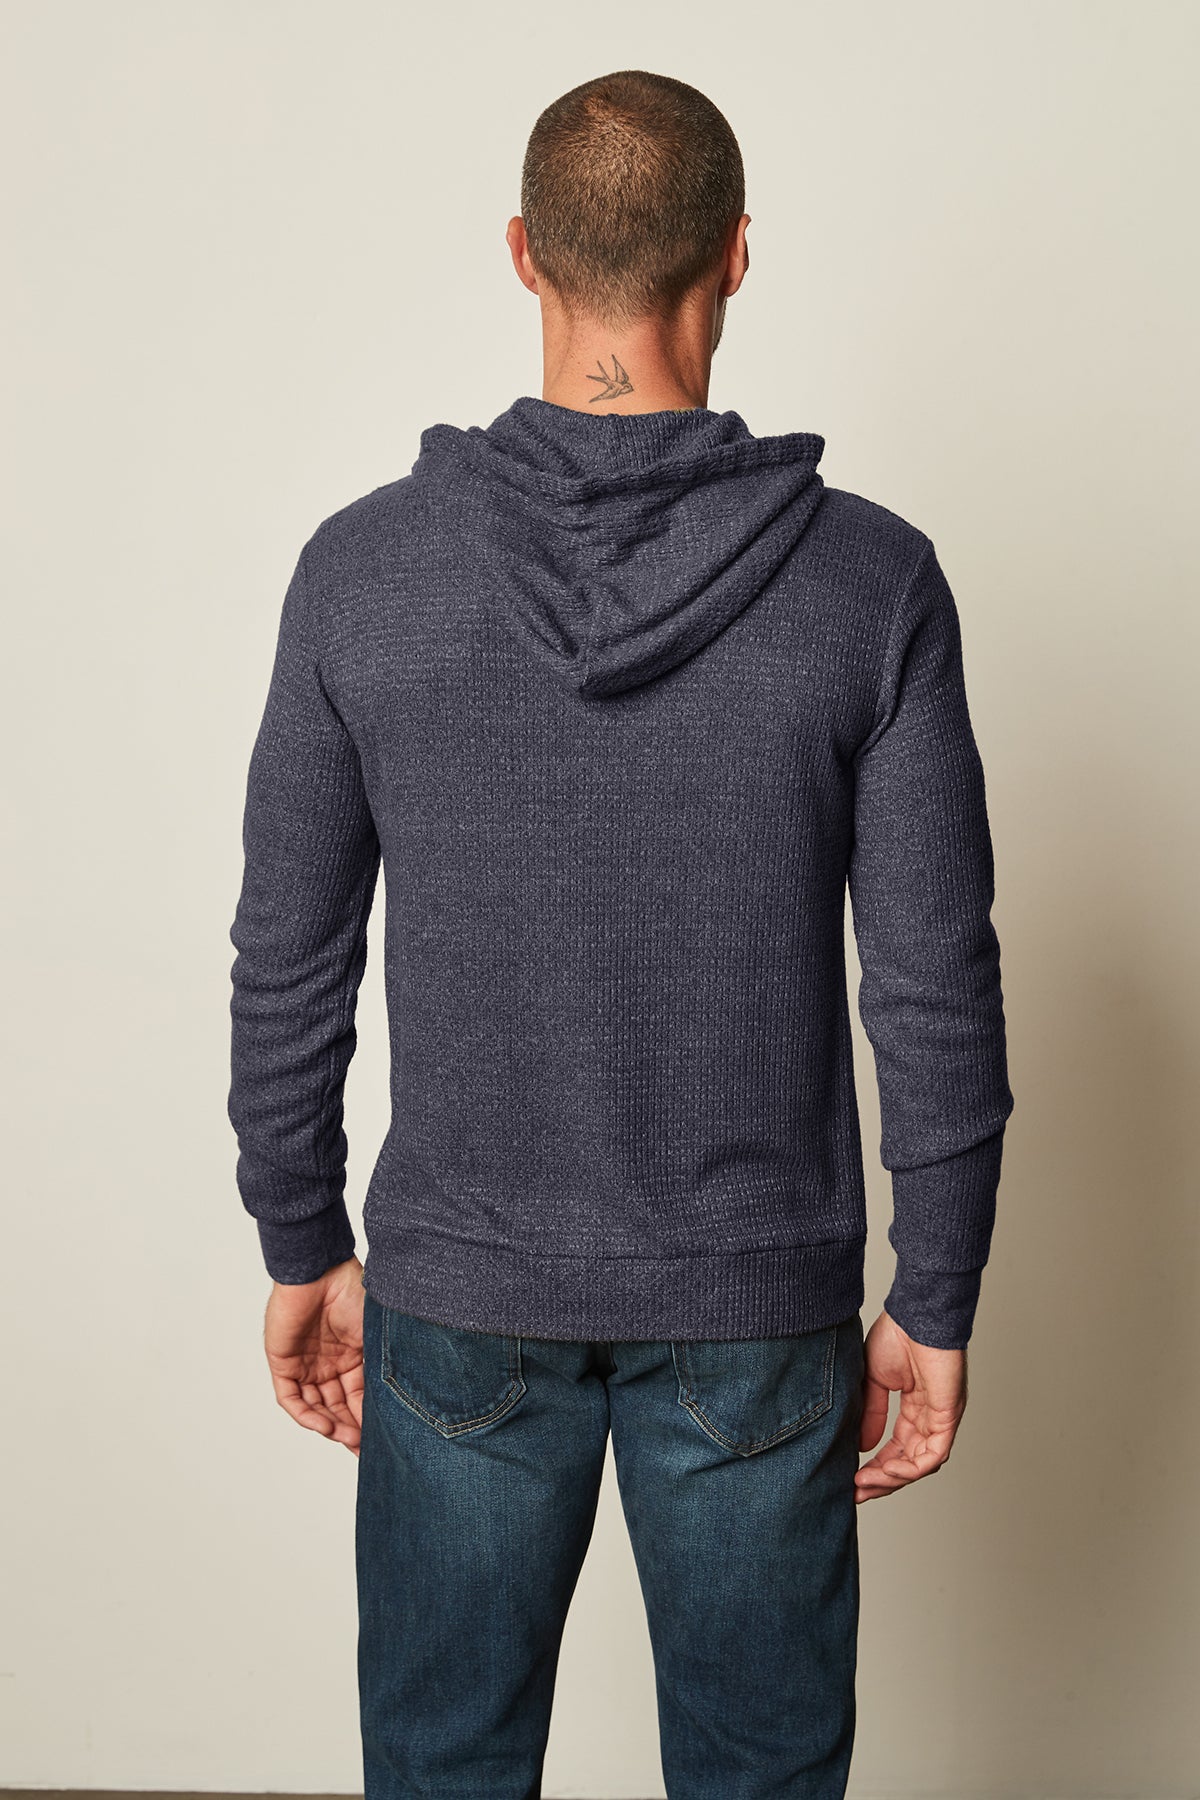 The back view of a man wearing navy jeans and a Velvet by Graham & Spencer COLIN THERMAL HOODIE.-25483883249857